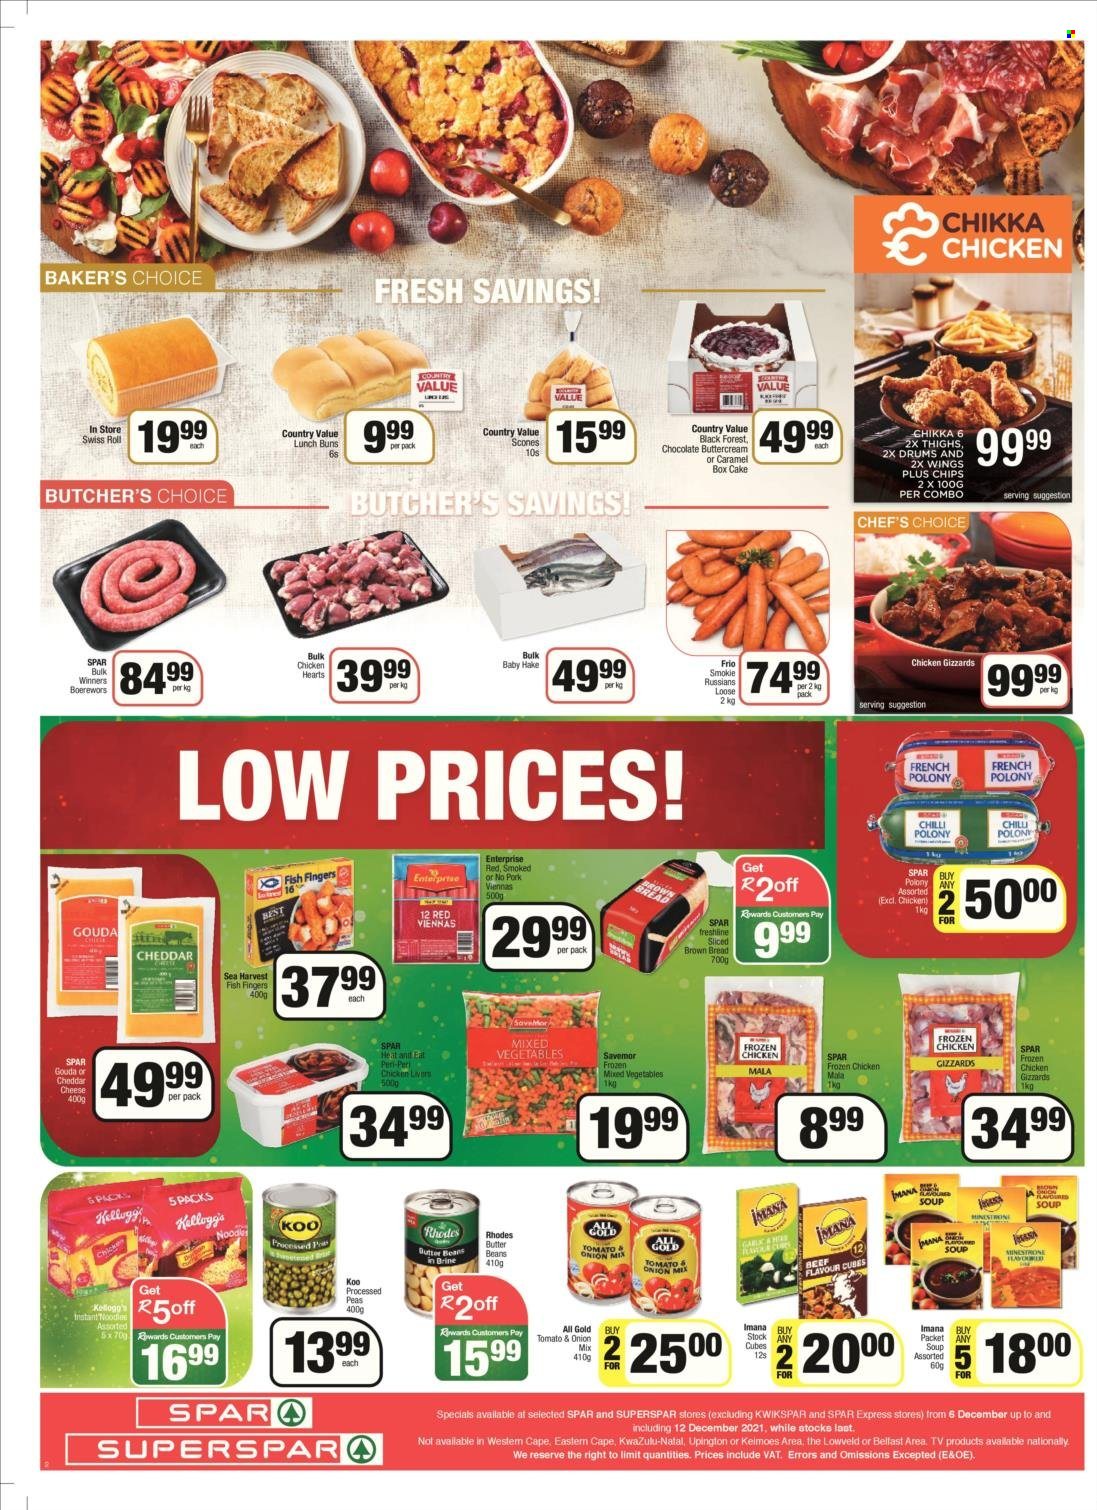 SPAR catalogue  - 06/12/2021 - 12/12/2021 - Sales products - bread, cake, brown bread, buns, swiss roll, beans, peas, hake, fish, fish fingers, Sea Harvest, fish sticks, soup, french polony, polony, vienna sausage, russians, gouda, cheese, mixed vegetables, chocolate, Koo, chicken gizzards, chicken heart, chicken meat, braai wors. Page 10.